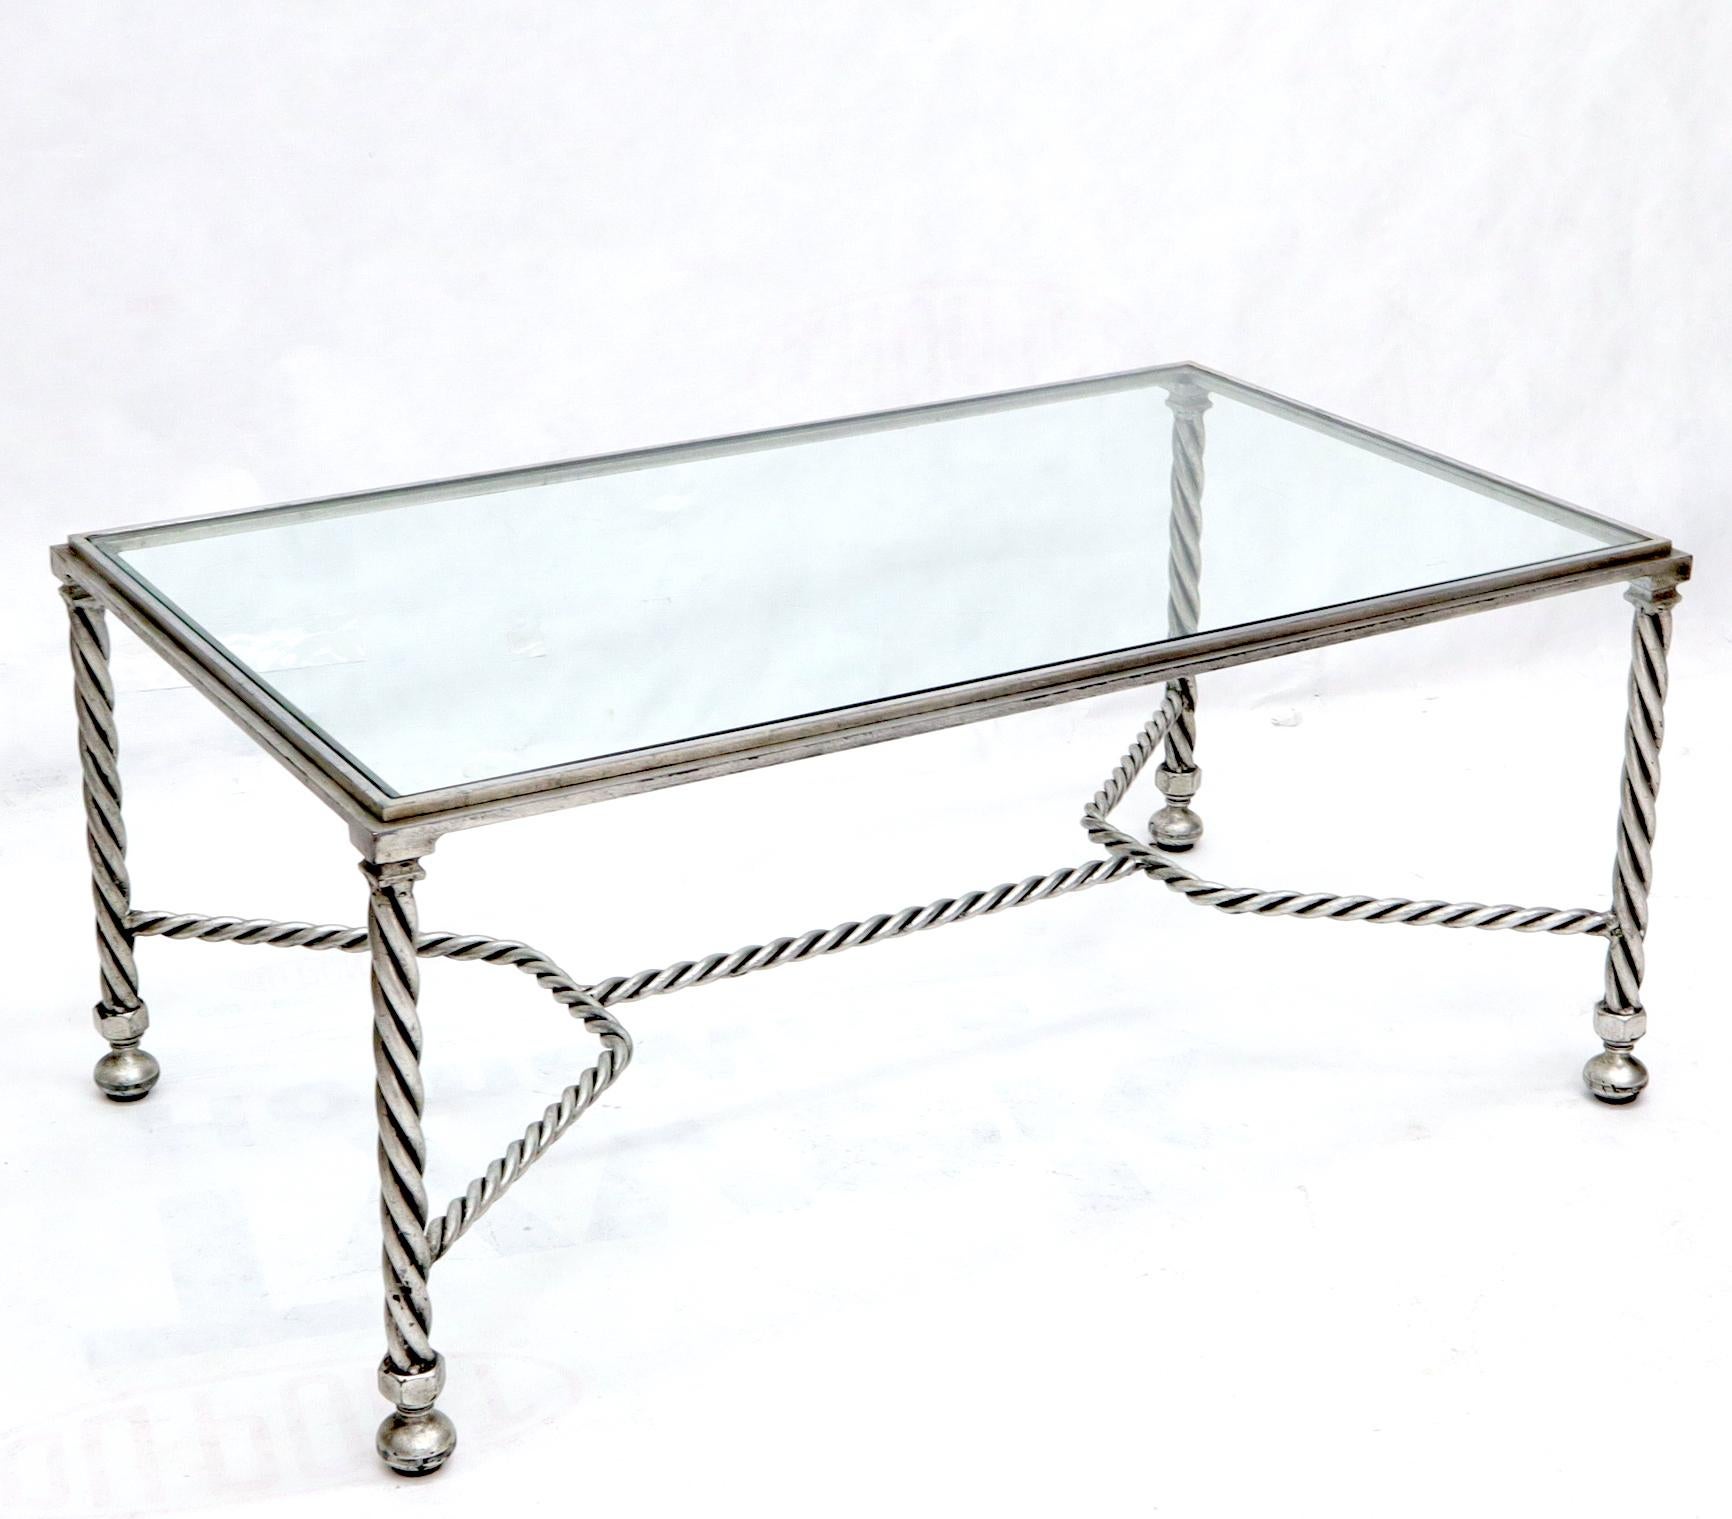 Italian Forged Metal Twisted Rope Effect Silver Gilt Base Rectangle Coffee Table For Sale